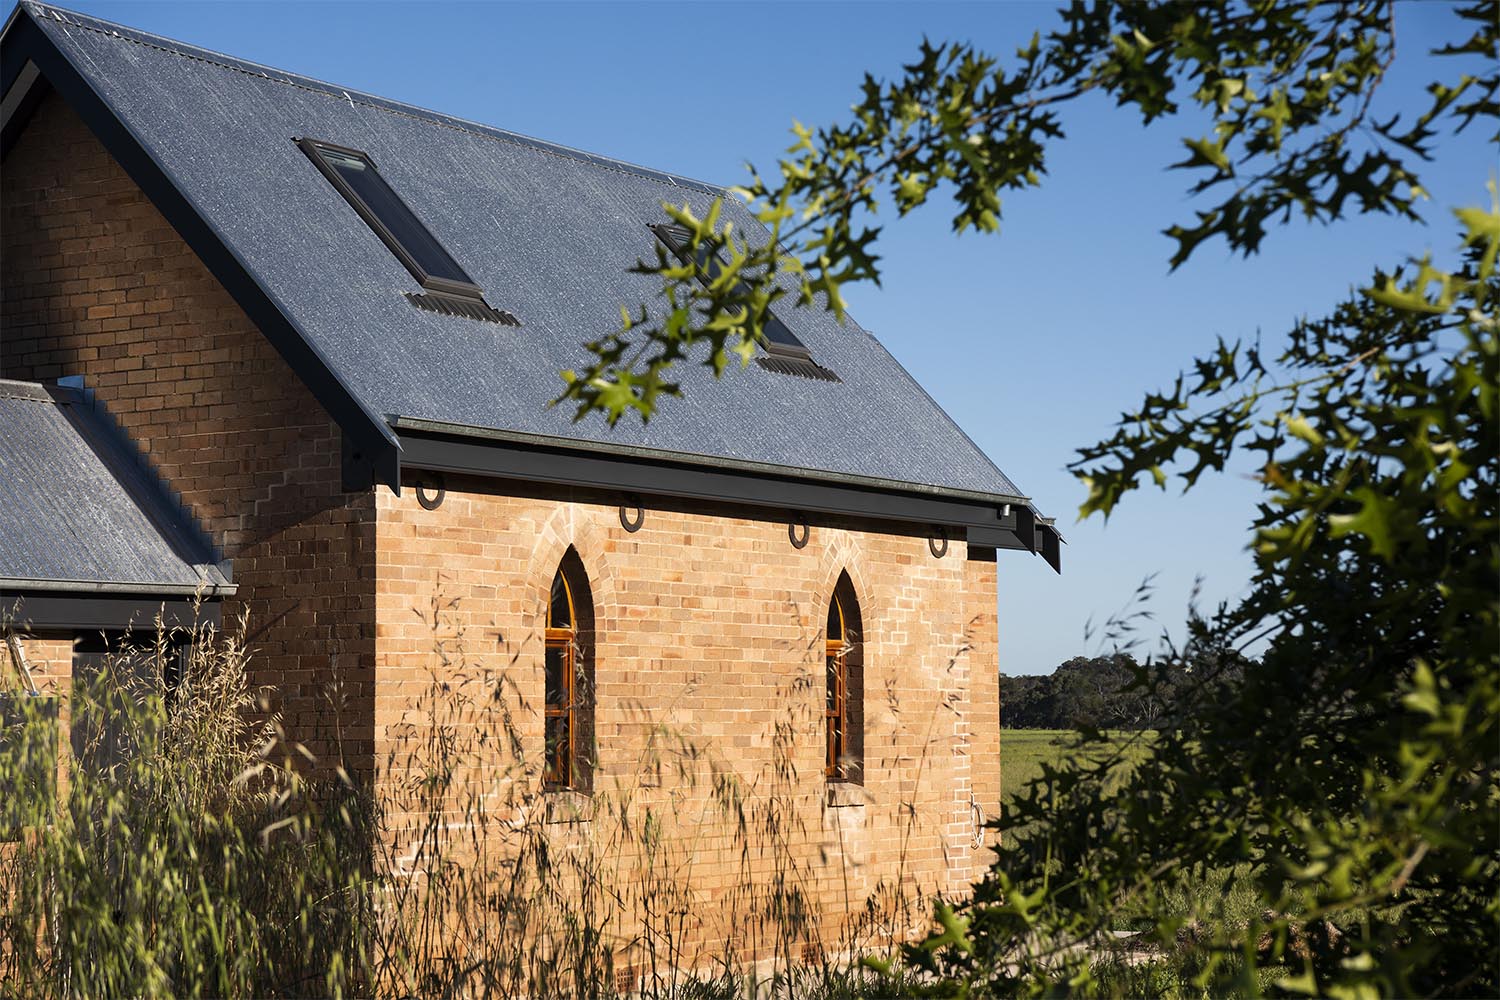 wilgowrah church historical accommodation mudgee heritage renovated